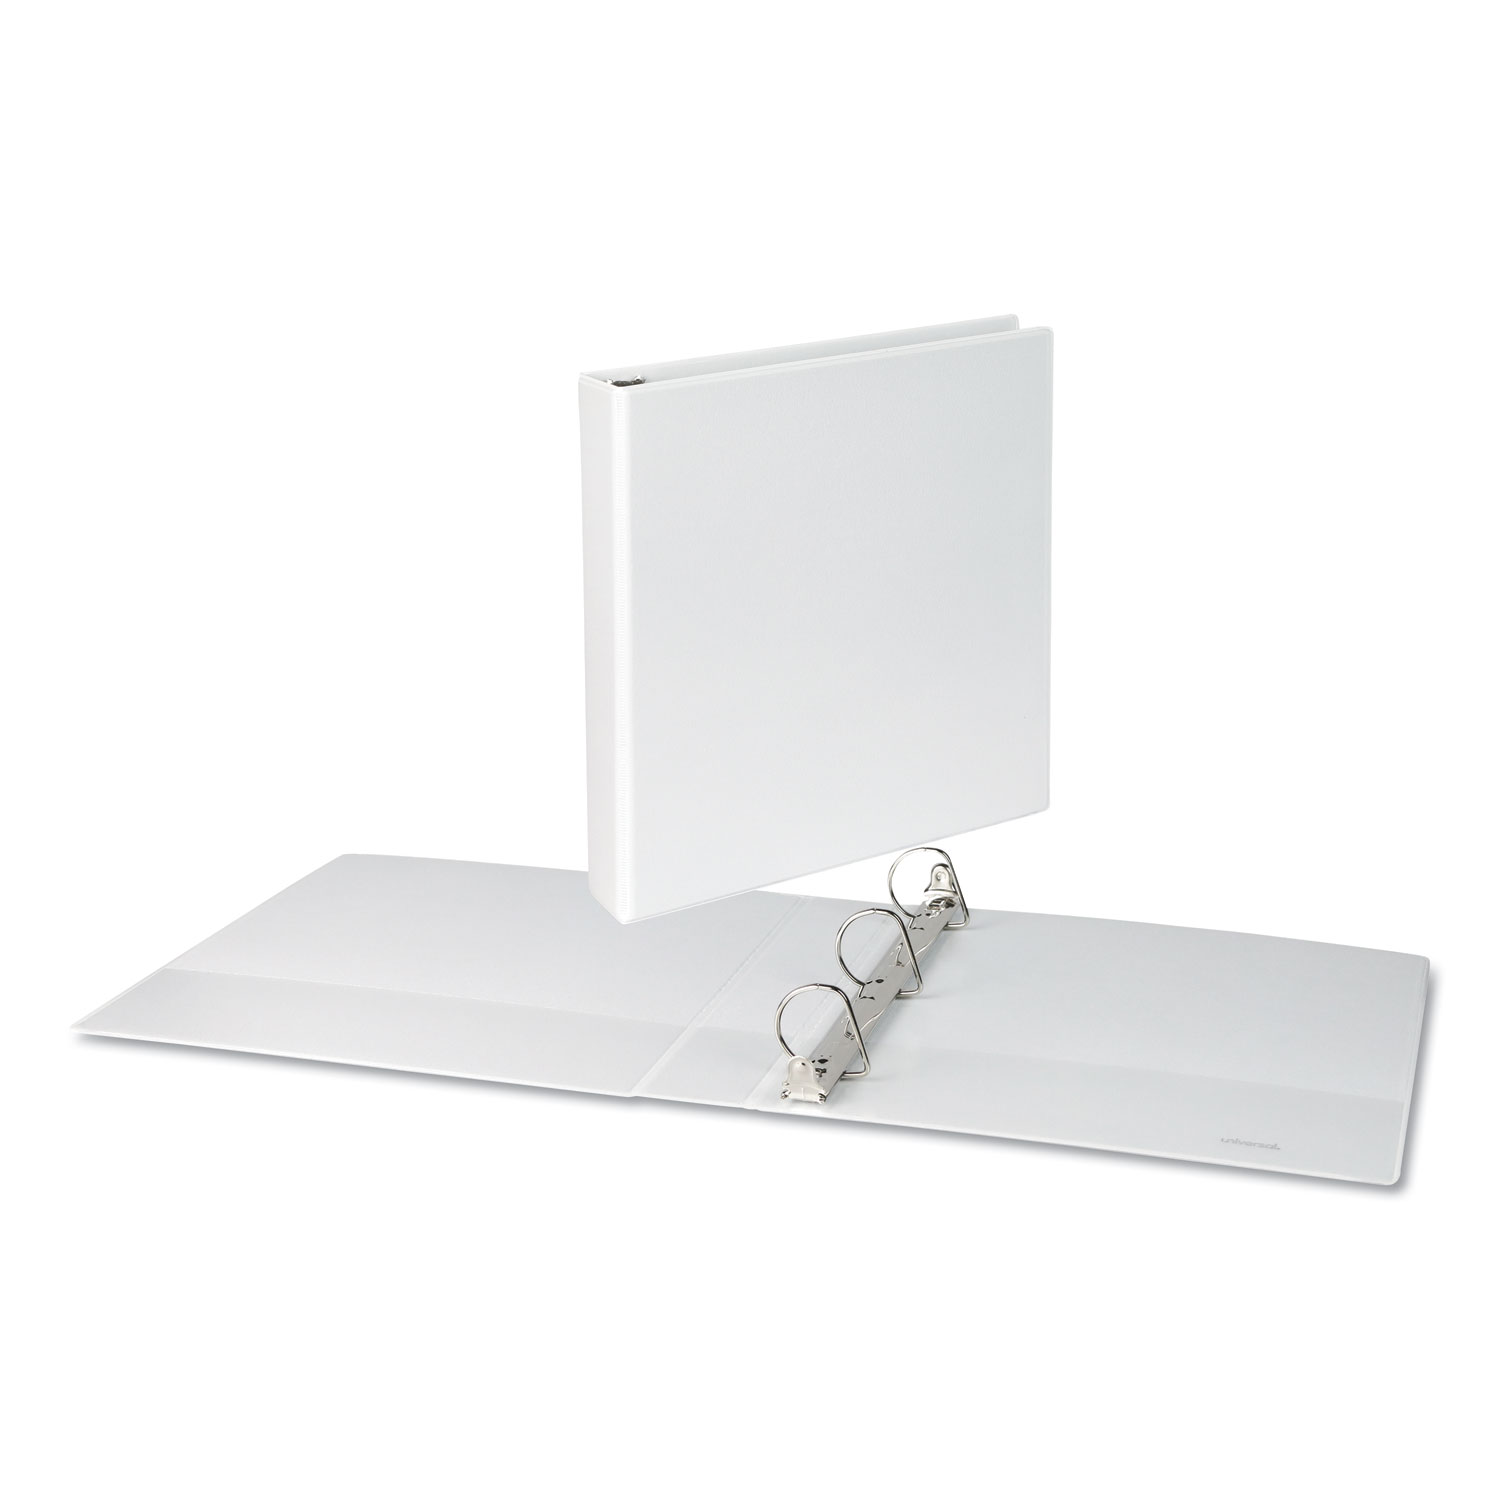 3 Ring Binder, Slant D-Rings, Clear View, Pockets (6 inch, White)